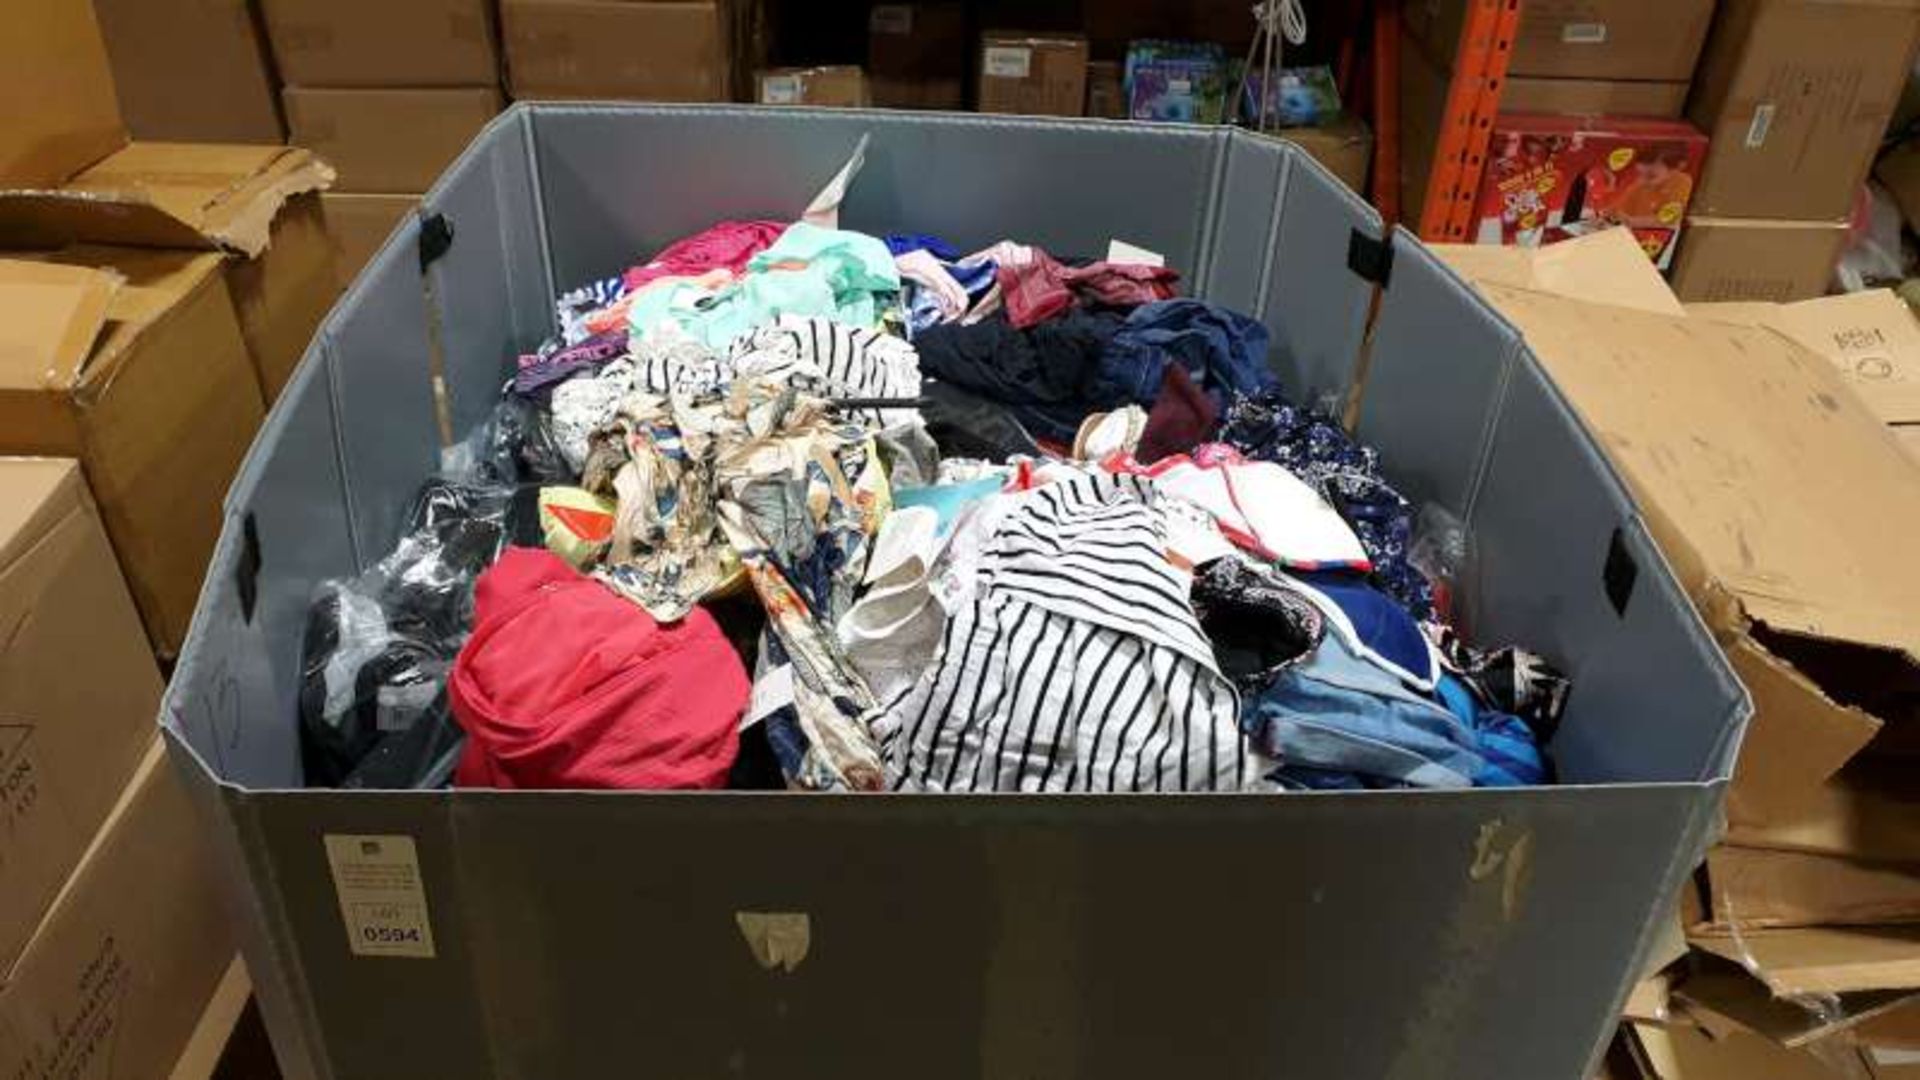 BOX PALLET CONTAINING A LARGE QUANTITY OF CLOTHING IN VARIOUS STYLES AND SIZES